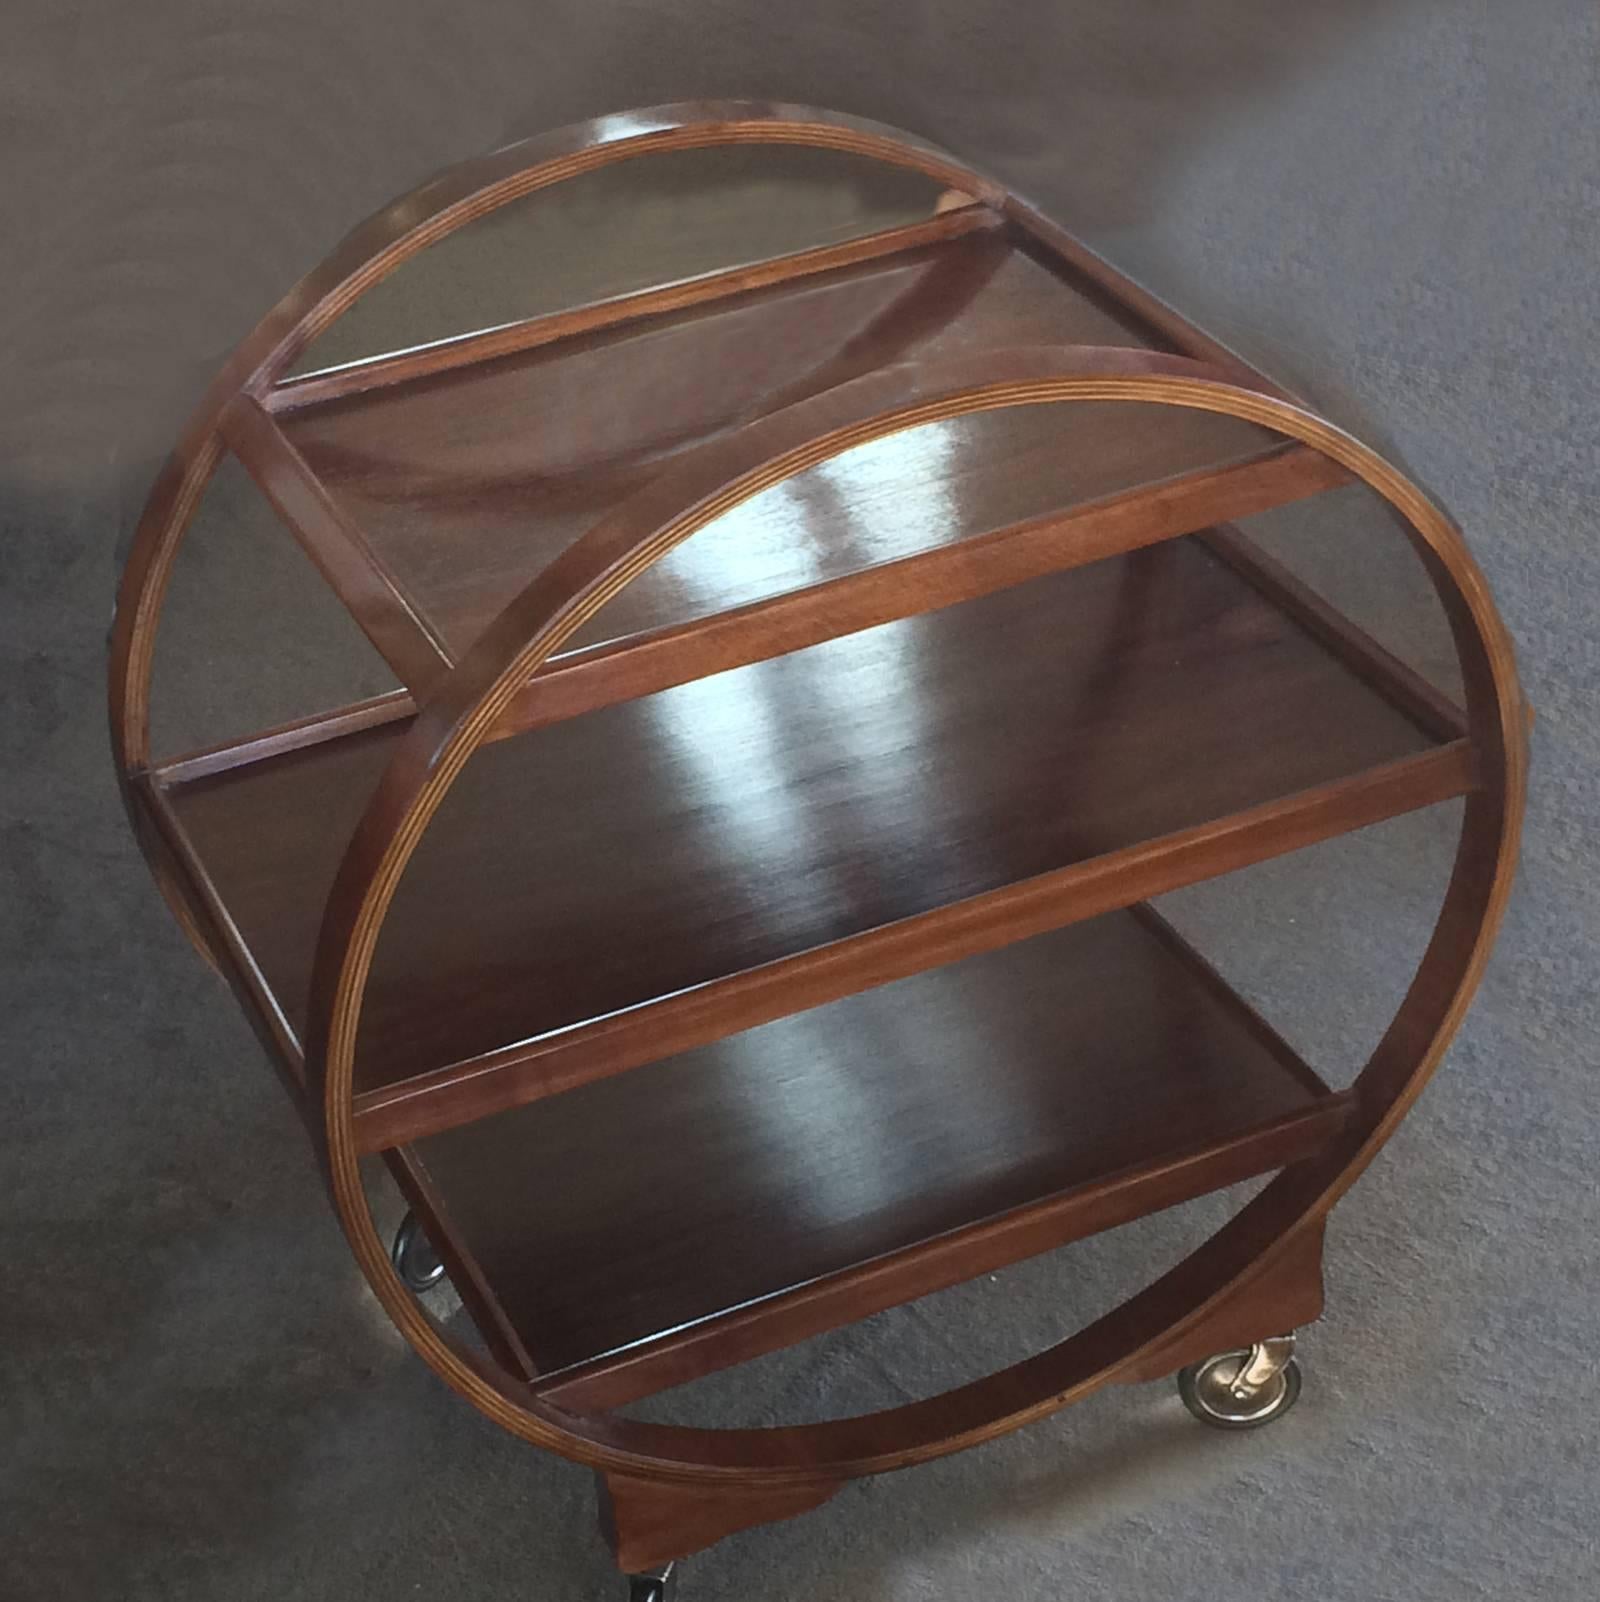 Art Deco bentwood, cocktail or tea trolley. Great, geometric design with three-tray levels and full circle bentwood support / handles. These are becoming very scarce, and are exceedingly rare in three levels and in such excellent condition; even the